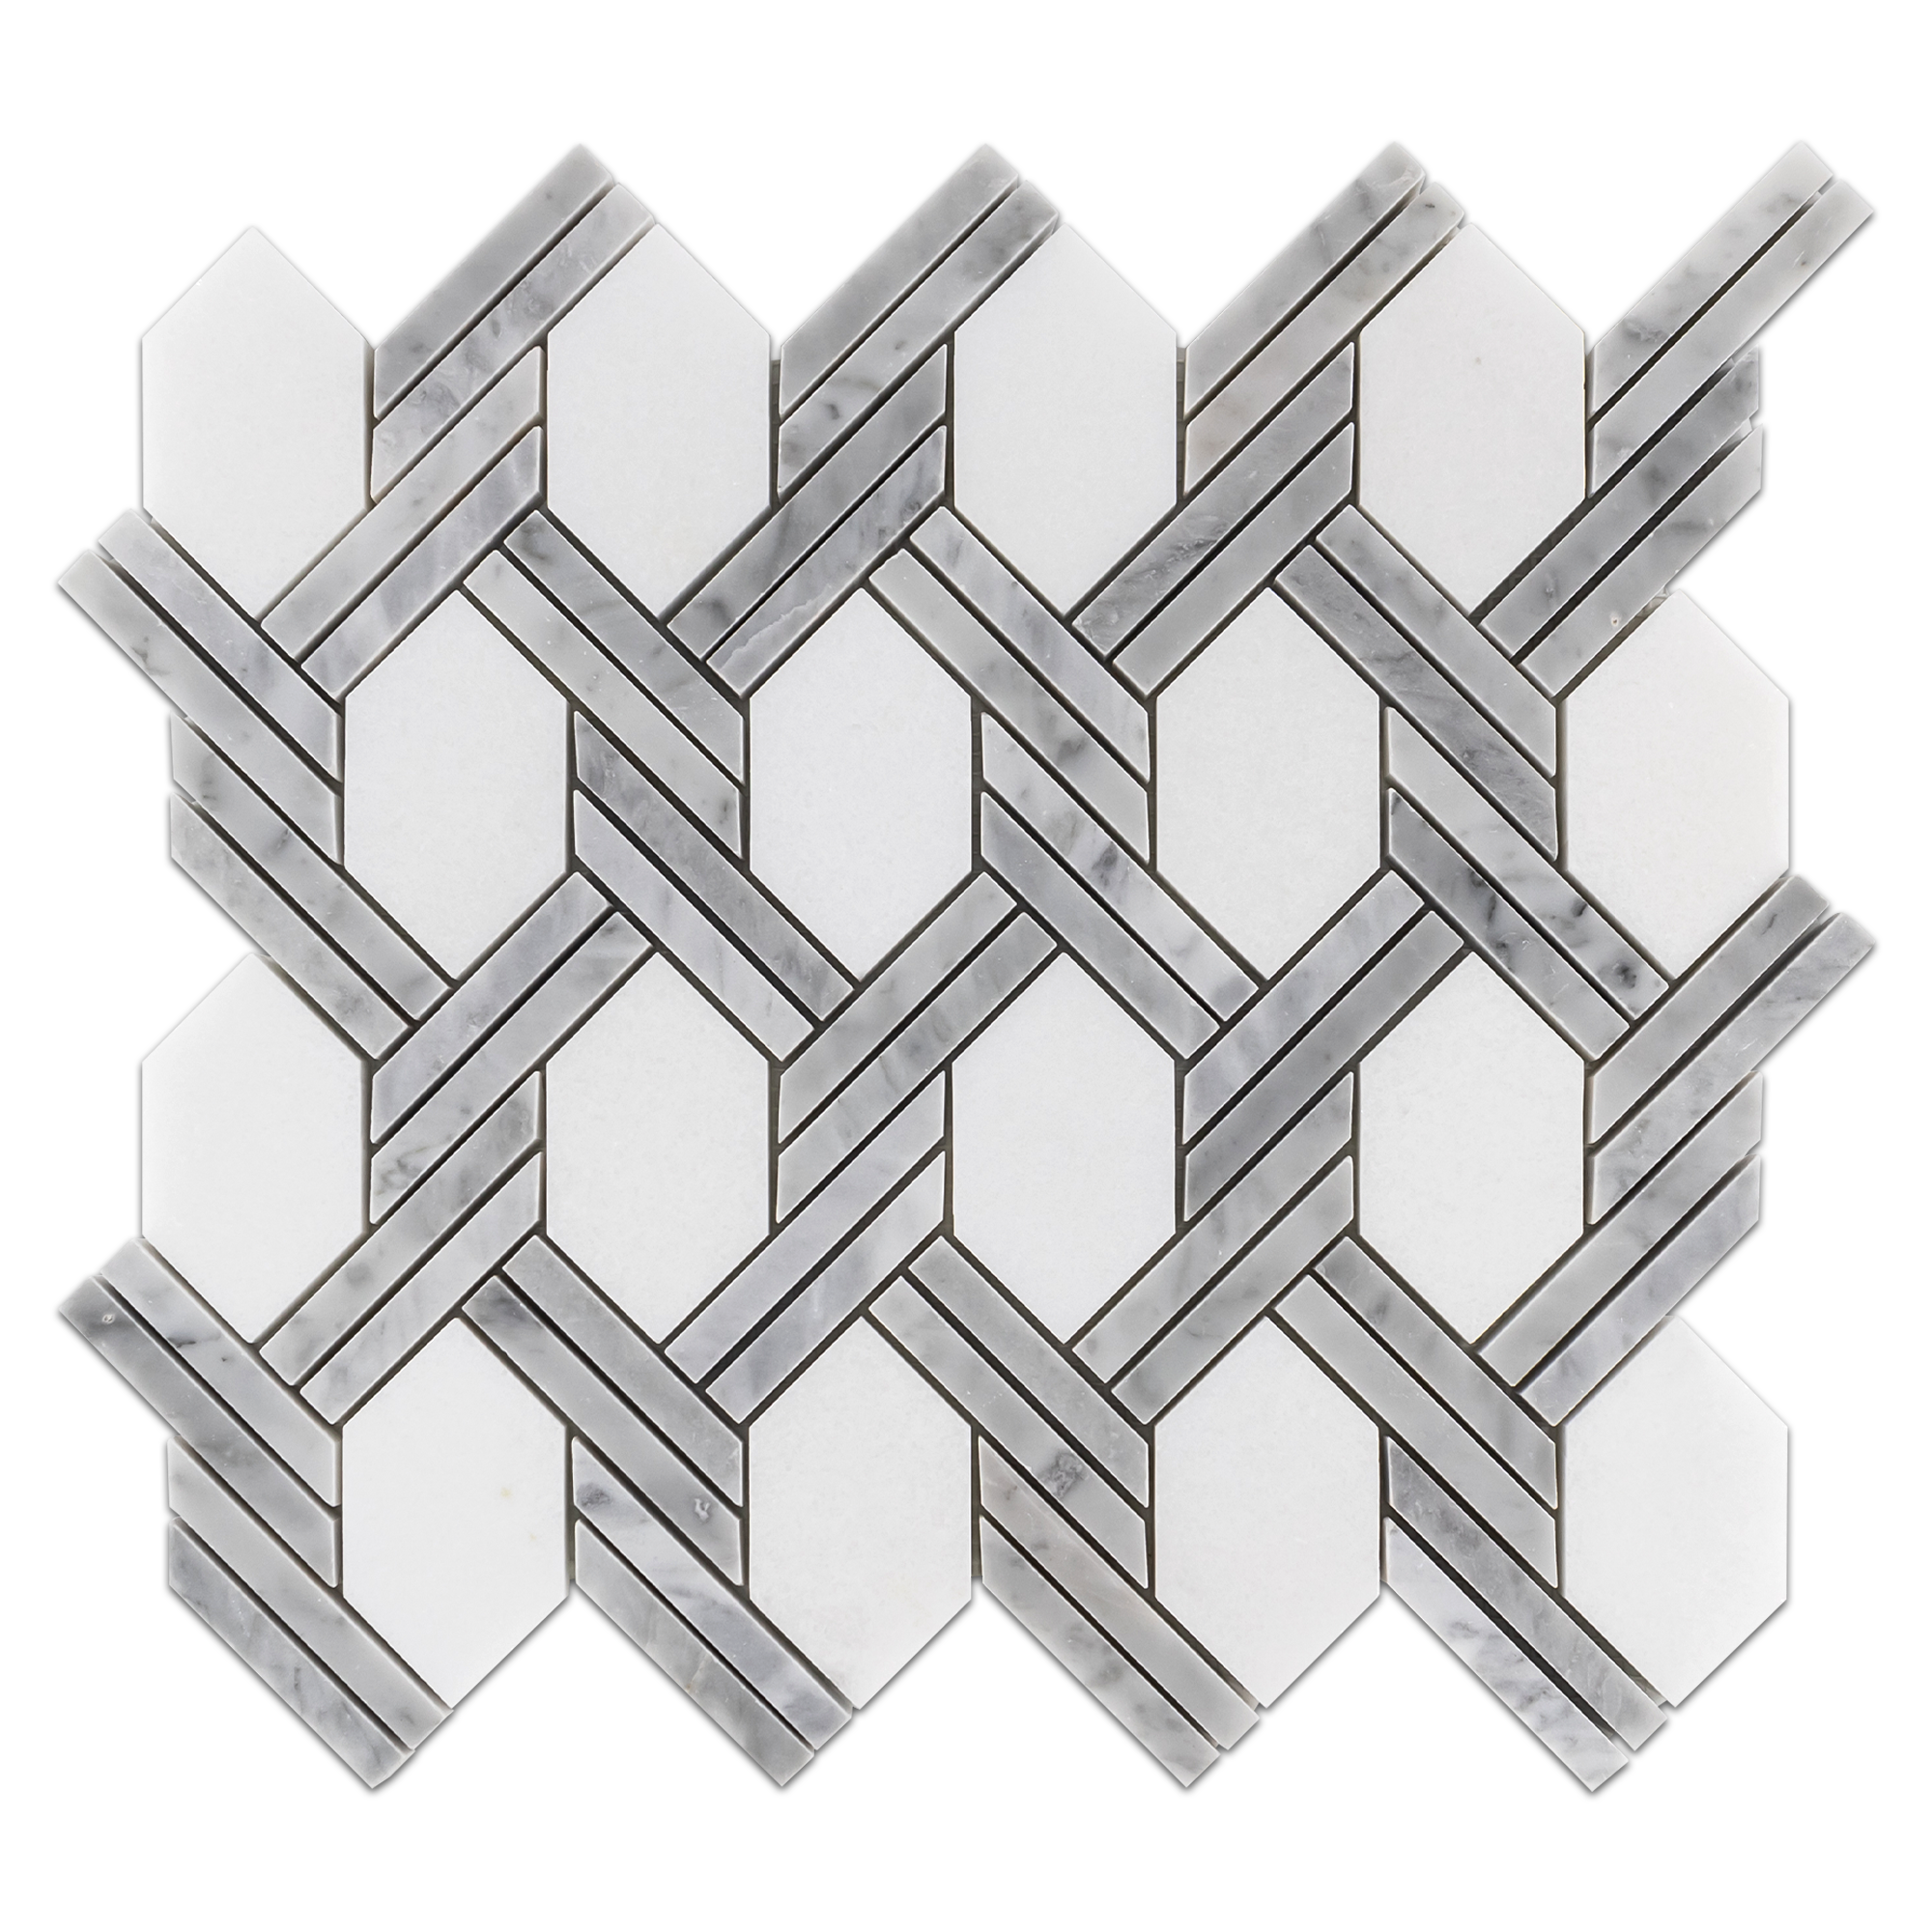 Elon White Thassos Carrara Dark Marble Braided Picket Field Mosaic 11.625x12.875x0.375 Polished - Surface Group Online Tile Store